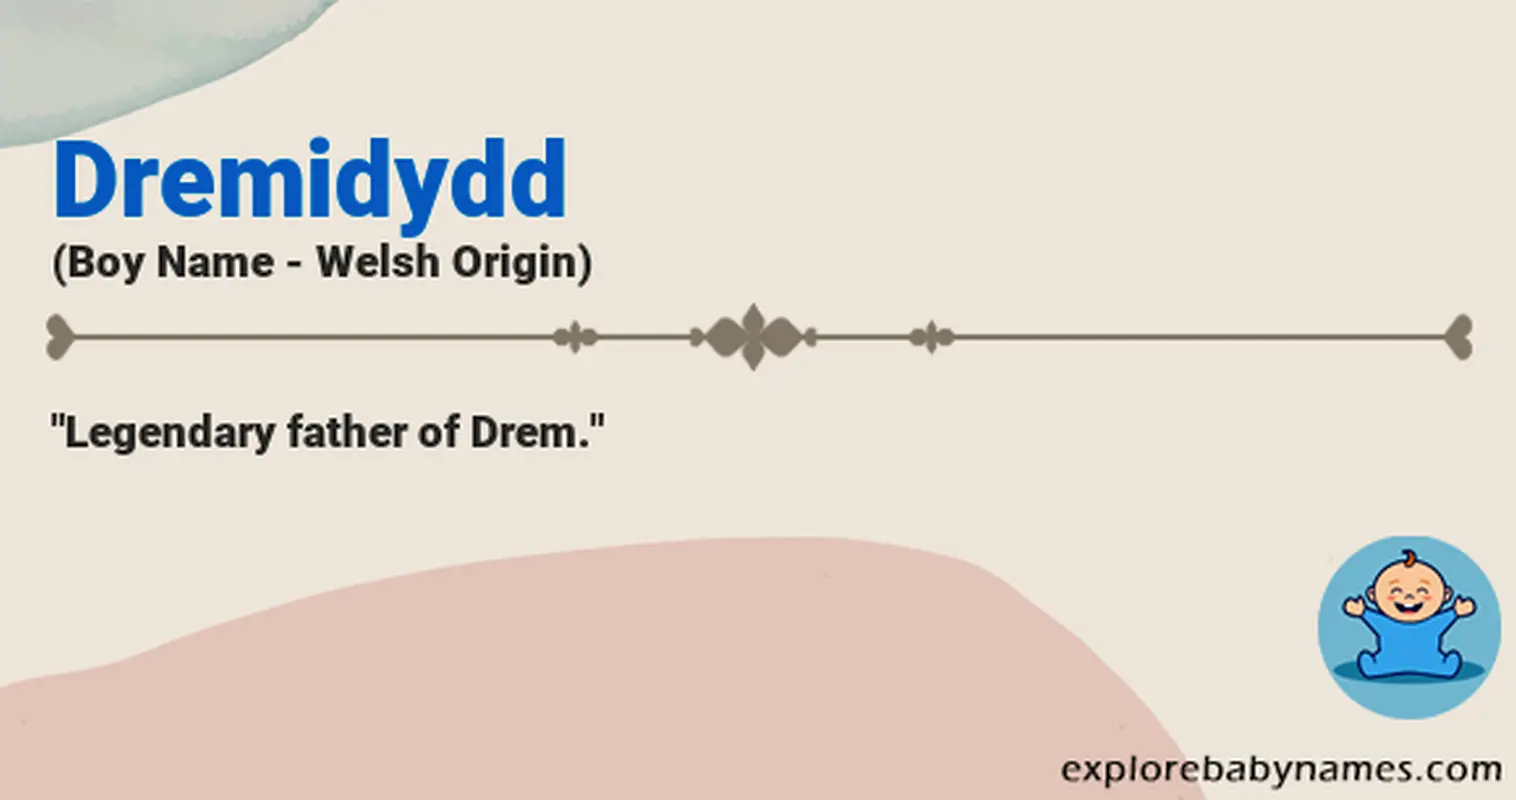 Meaning of Dremidydd